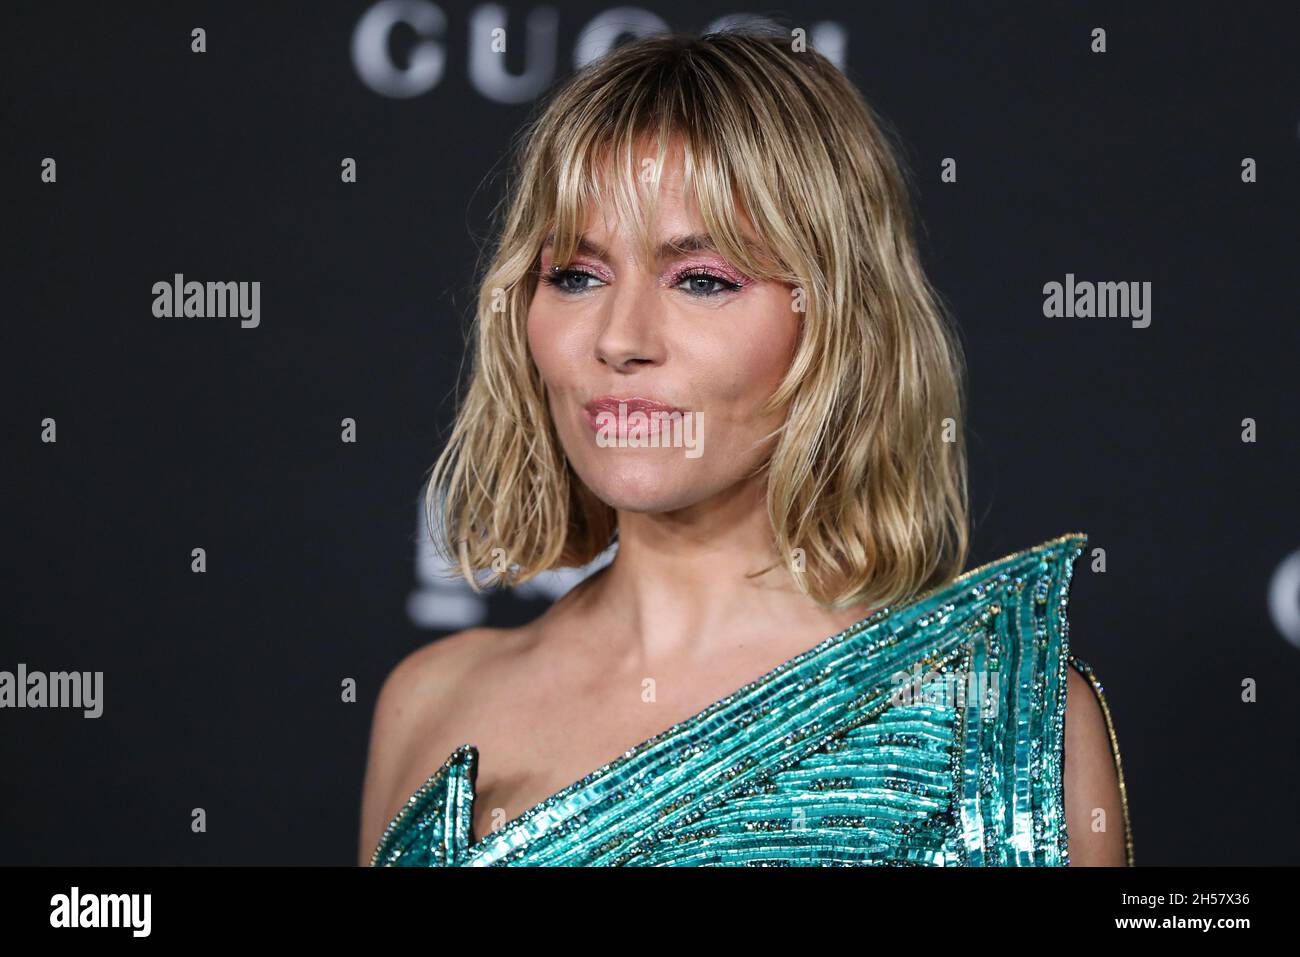 LOS ANGELES, CALIFORNIA, USA - NOVEMBER 06: Actress Sienna Miller wearing a dress by Gucci arrives at the 10th Annual LACMA Art + Film Gala 2021 held at the Los Angeles County Museum of Art on November 6, 2021 in Los Angeles, California, United States. (Photo by Xavier Collin/Image Press Agency/Sipa USA) Stock Photo